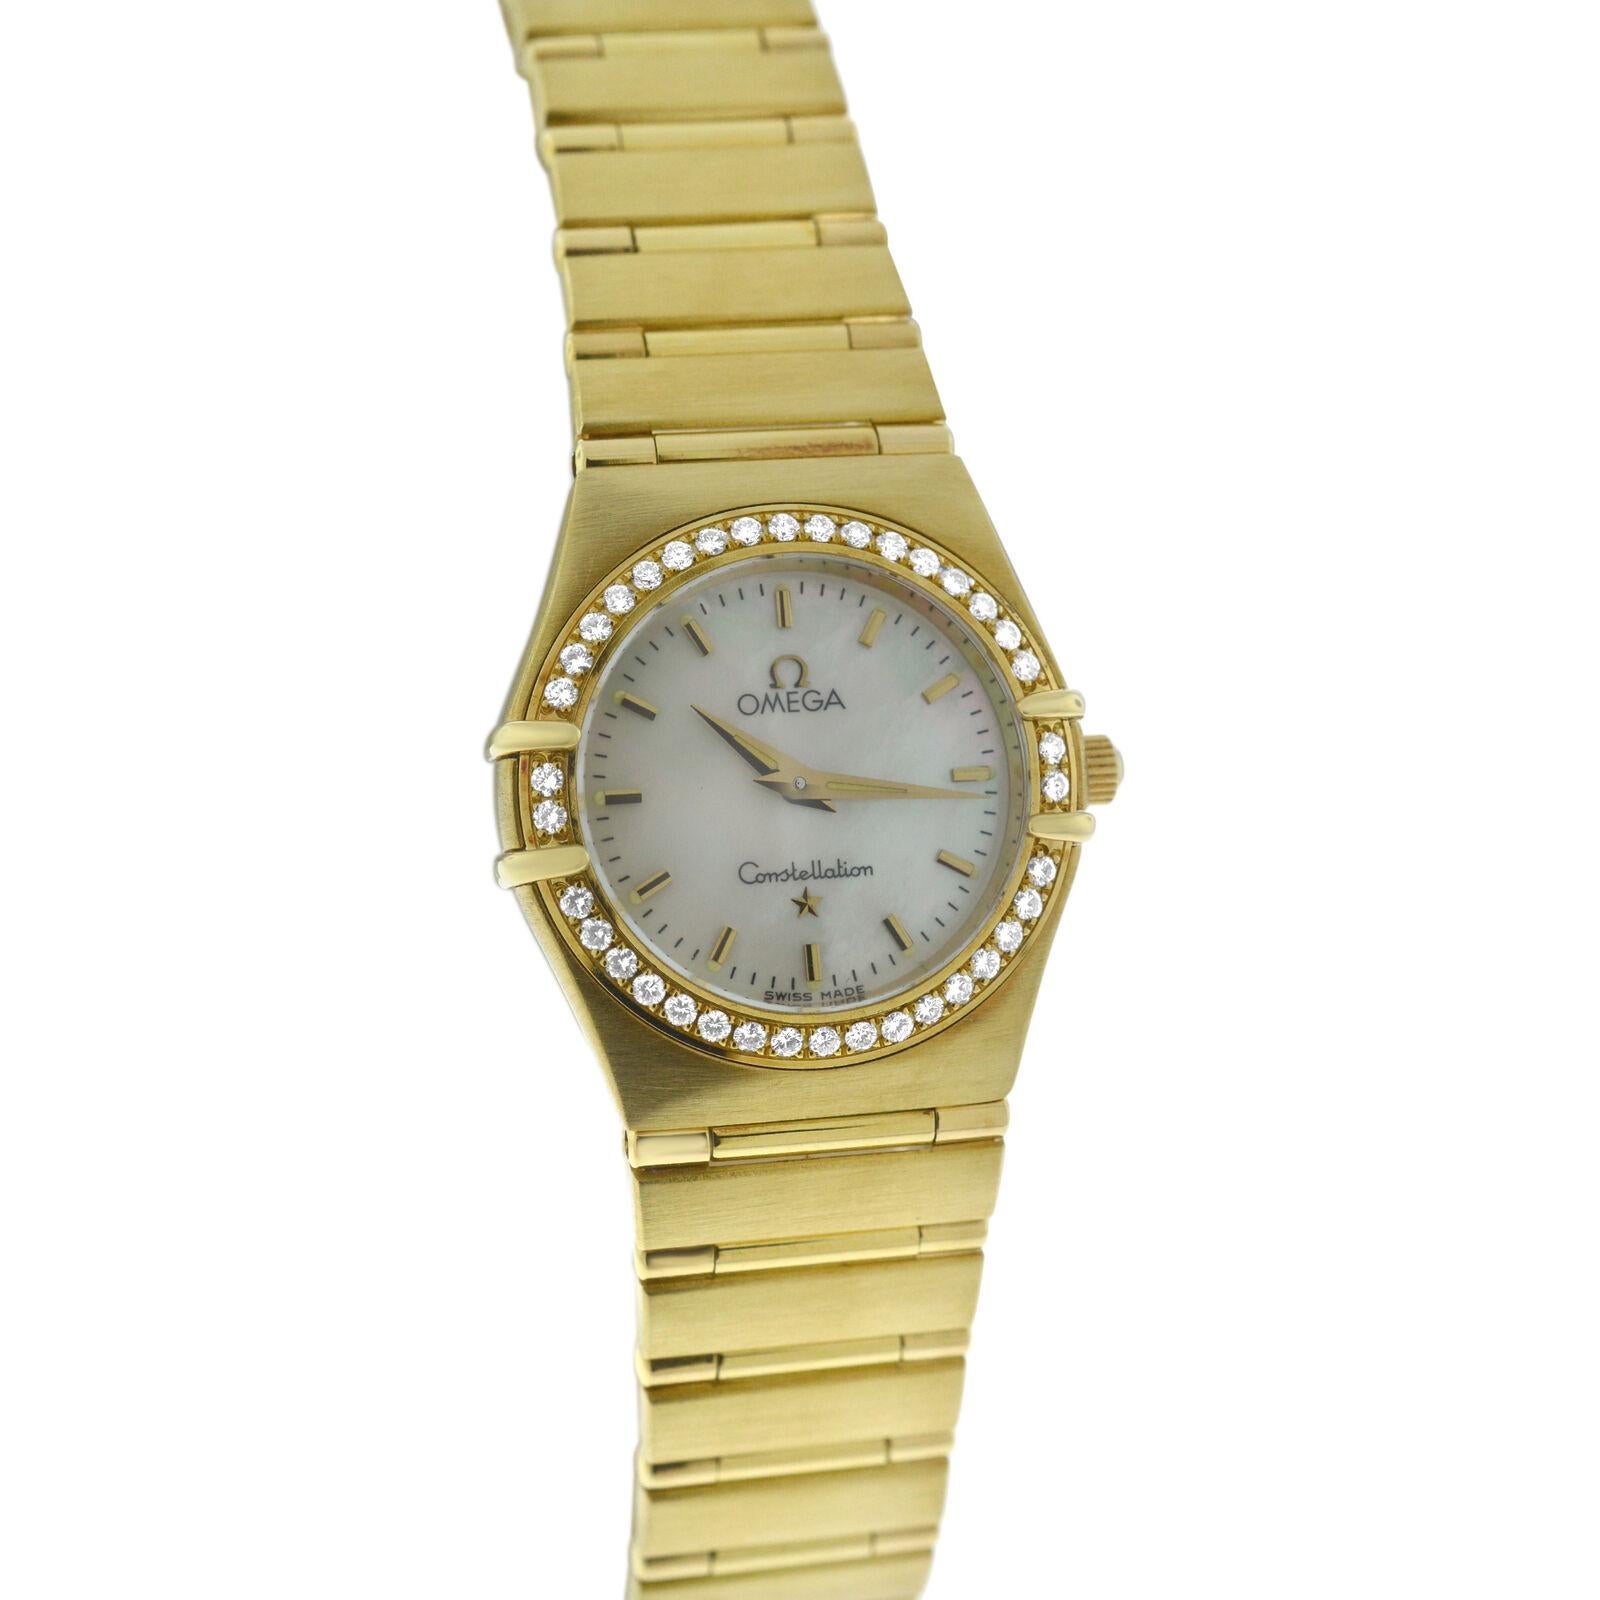 Brand	Omega
Model	Constellation
Gender	Ladies
Condition	Preowned
Movement	Swiss Quartz
Case Material	18K Yellow Gold
Bracelet  Strap Material	
18K Yellow Gold
Clasp  Buckle Material	
18K Yellow Gold	
Clasp Type	Deployment
Bracelet  Strap width	16 mm